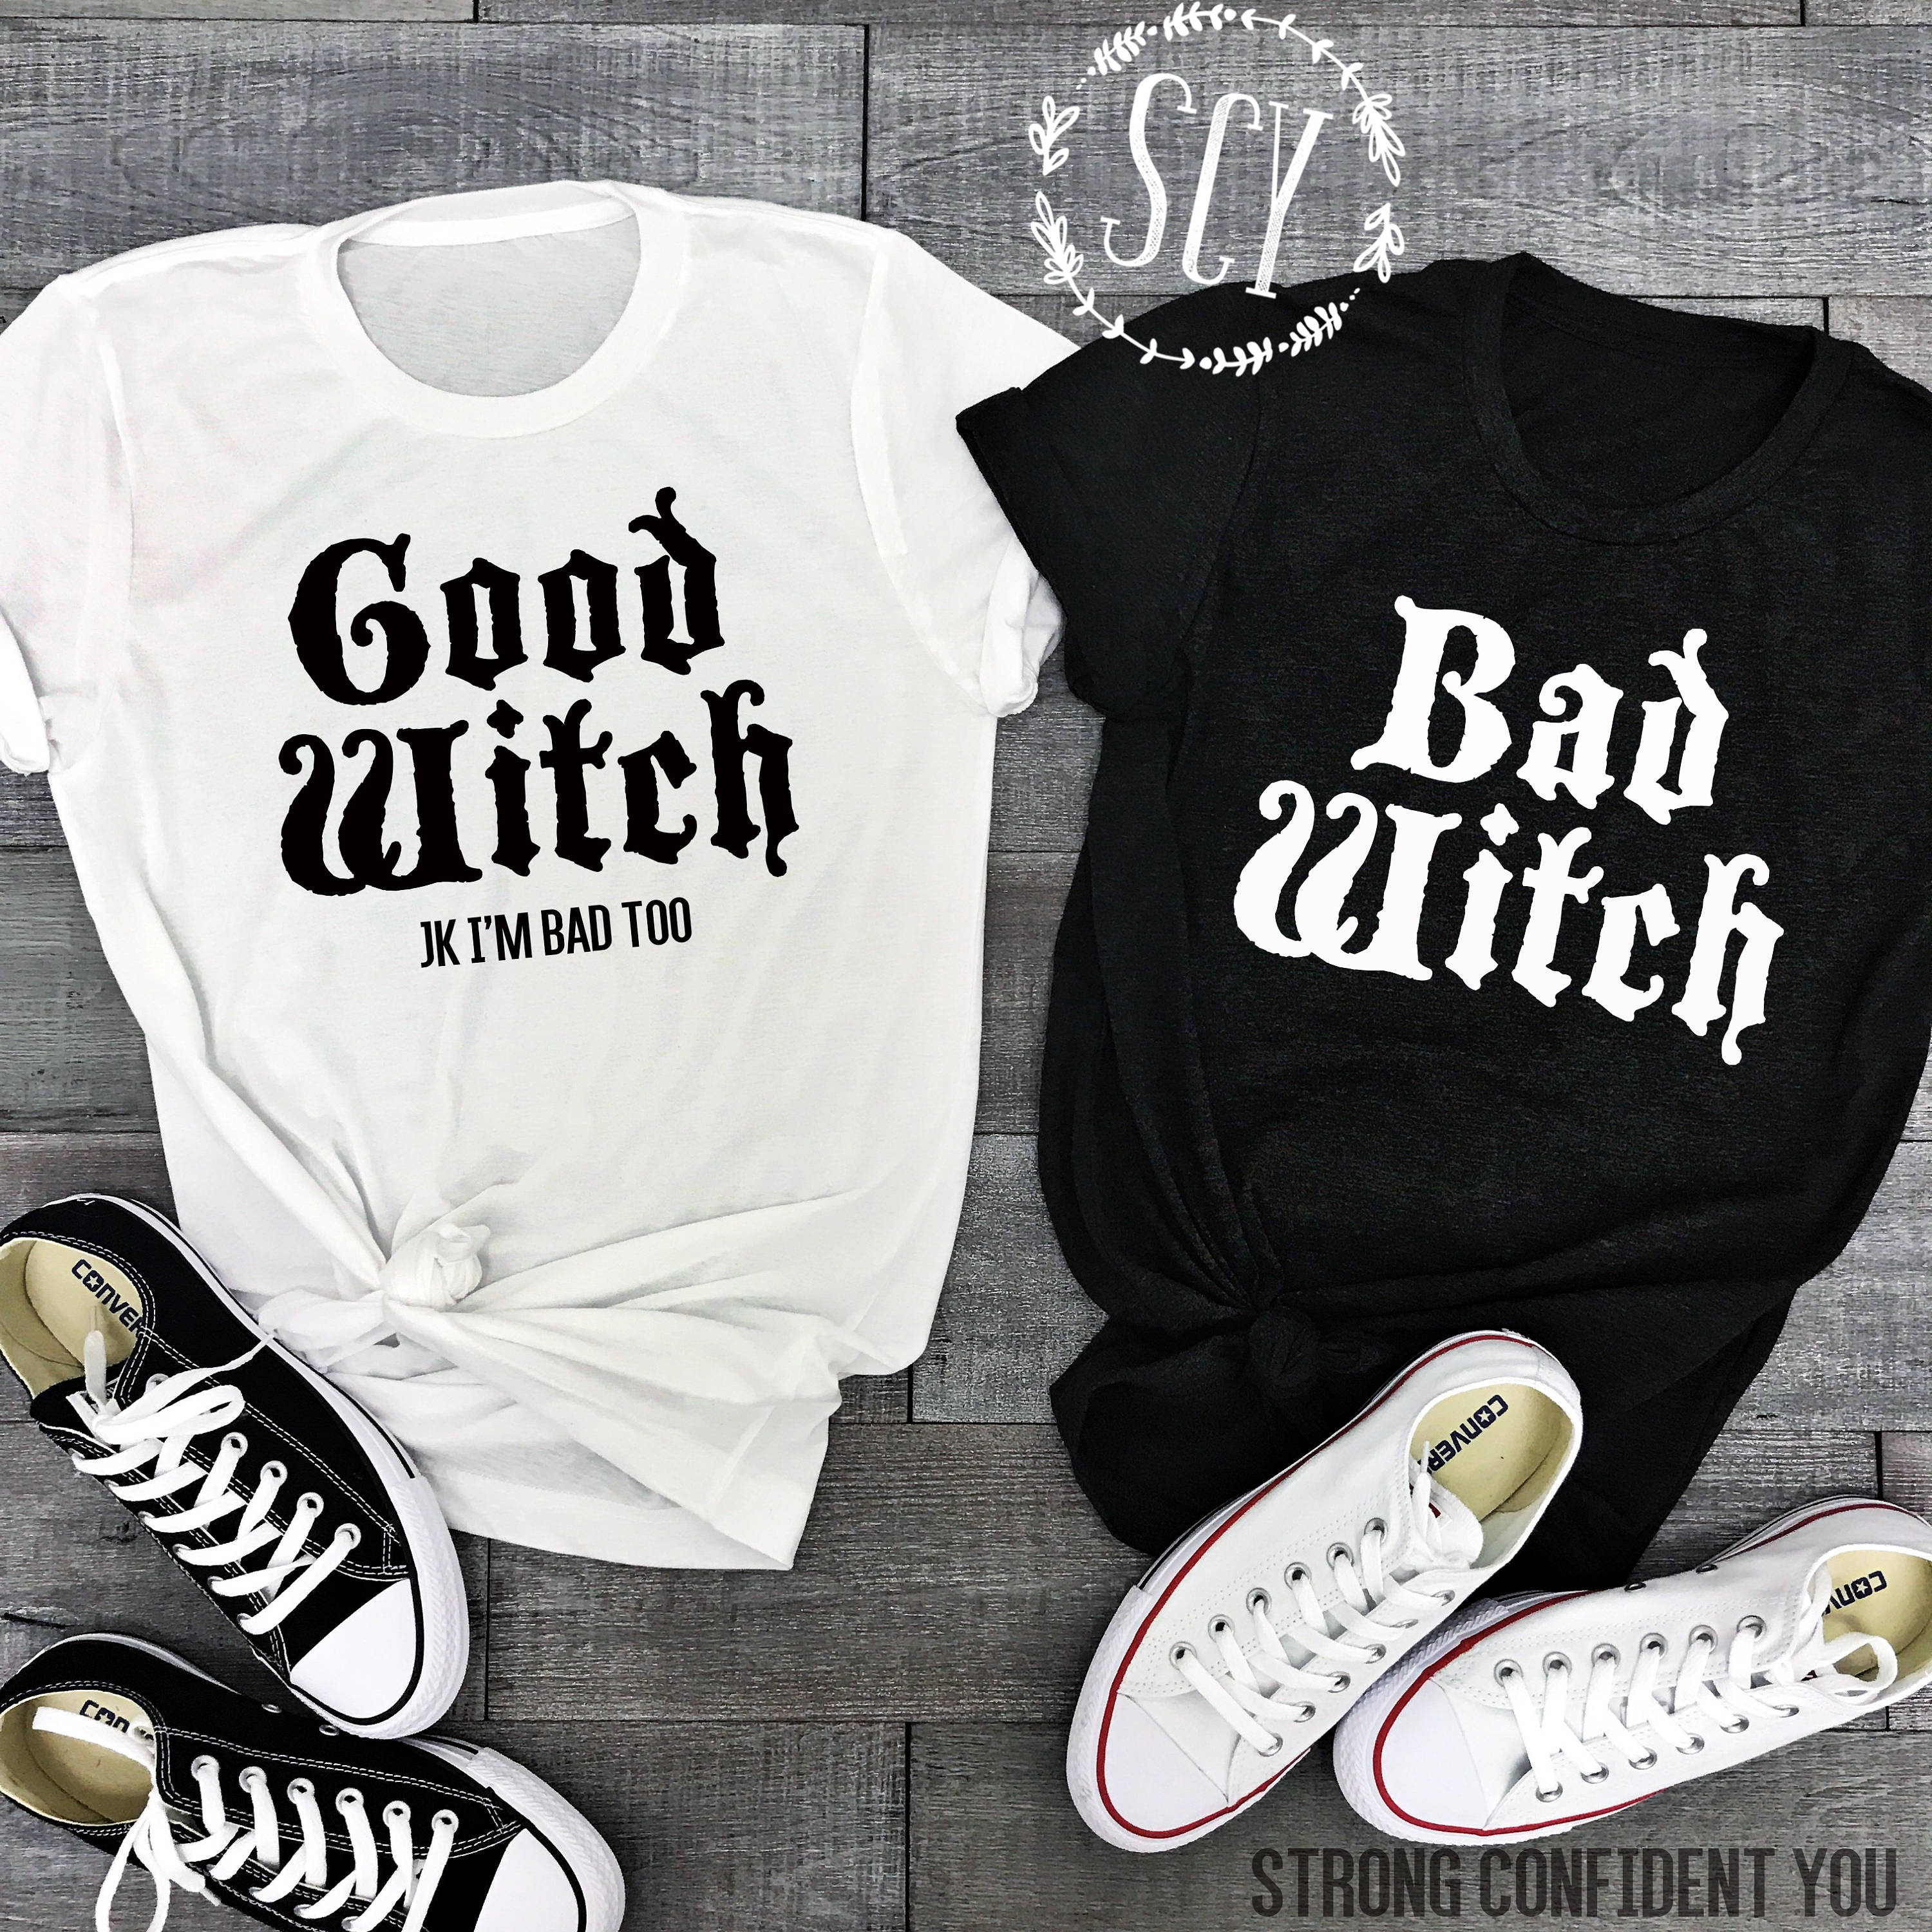 Good Witch Bad Witch Friend Shirts - Halloween Shirts - Halloween Tees - Halloween Costume - Funny Halloween Shirts